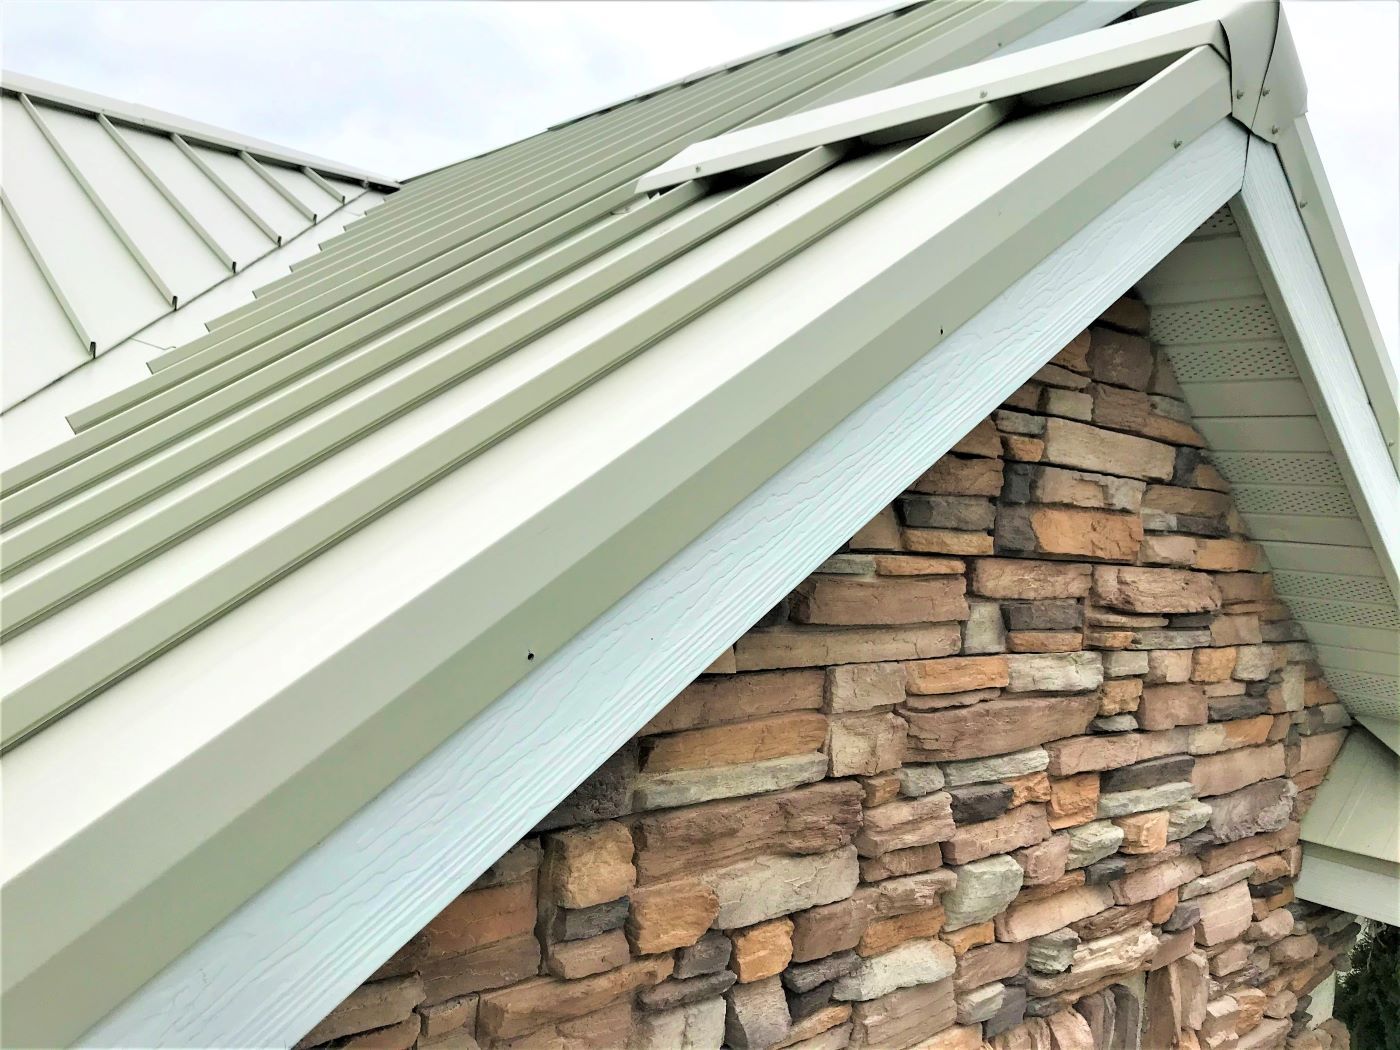 Does a Metal Roof Lower the Cost of Home Insurance?